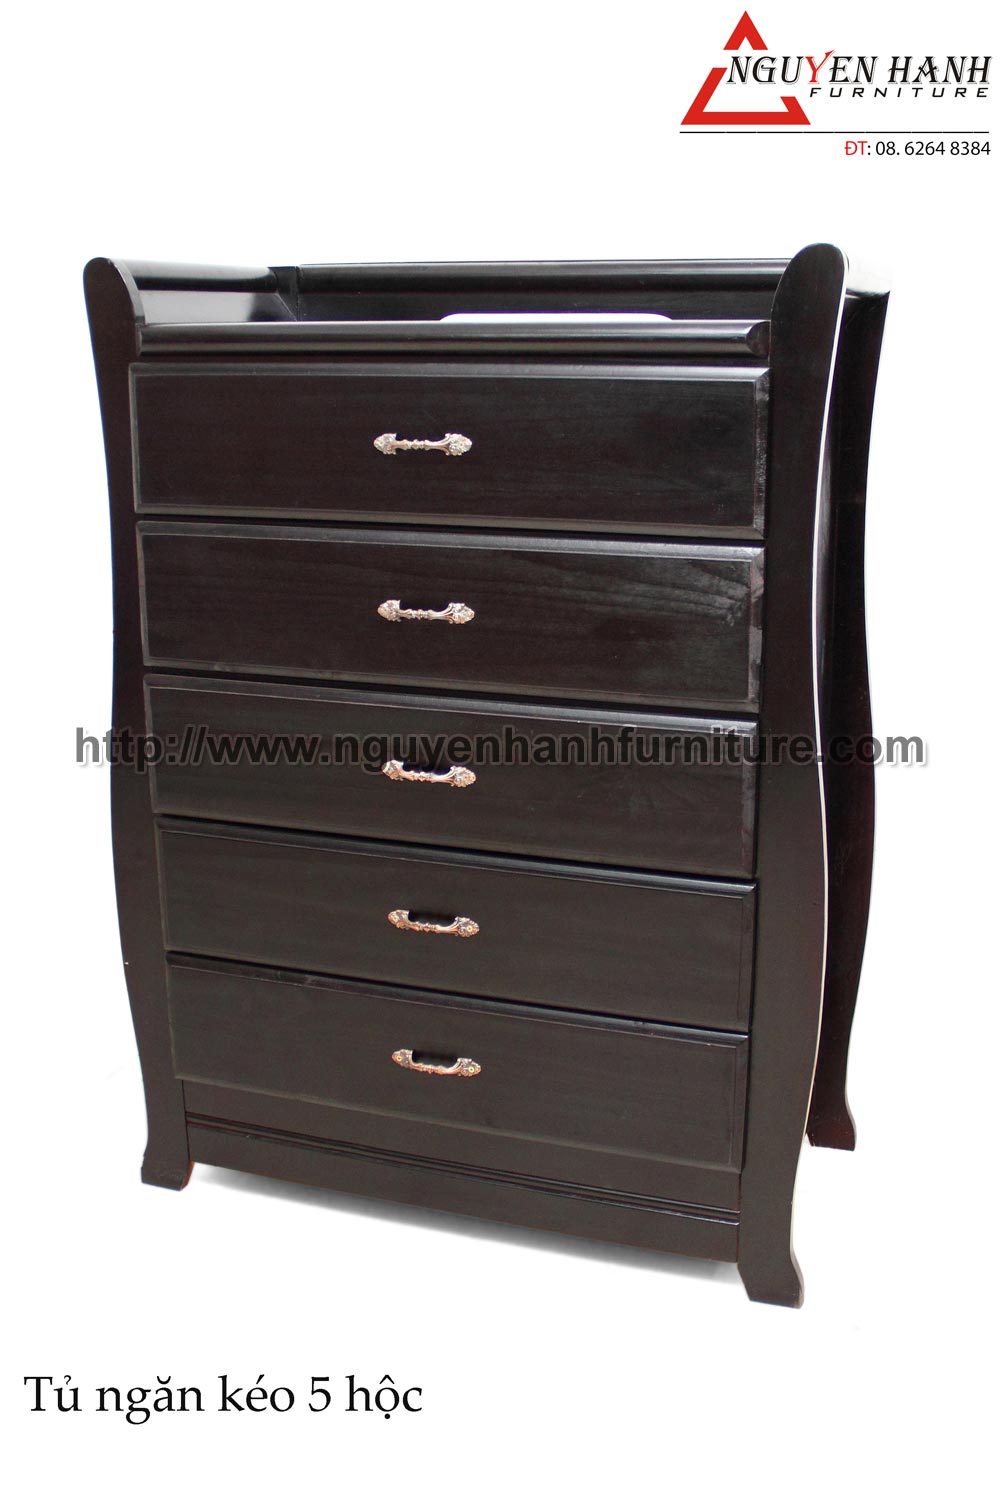 Name product: 5-drawer Cabinet- Dimensions: 44 x 90 x 123cm - Description: Rubber wood, MDF